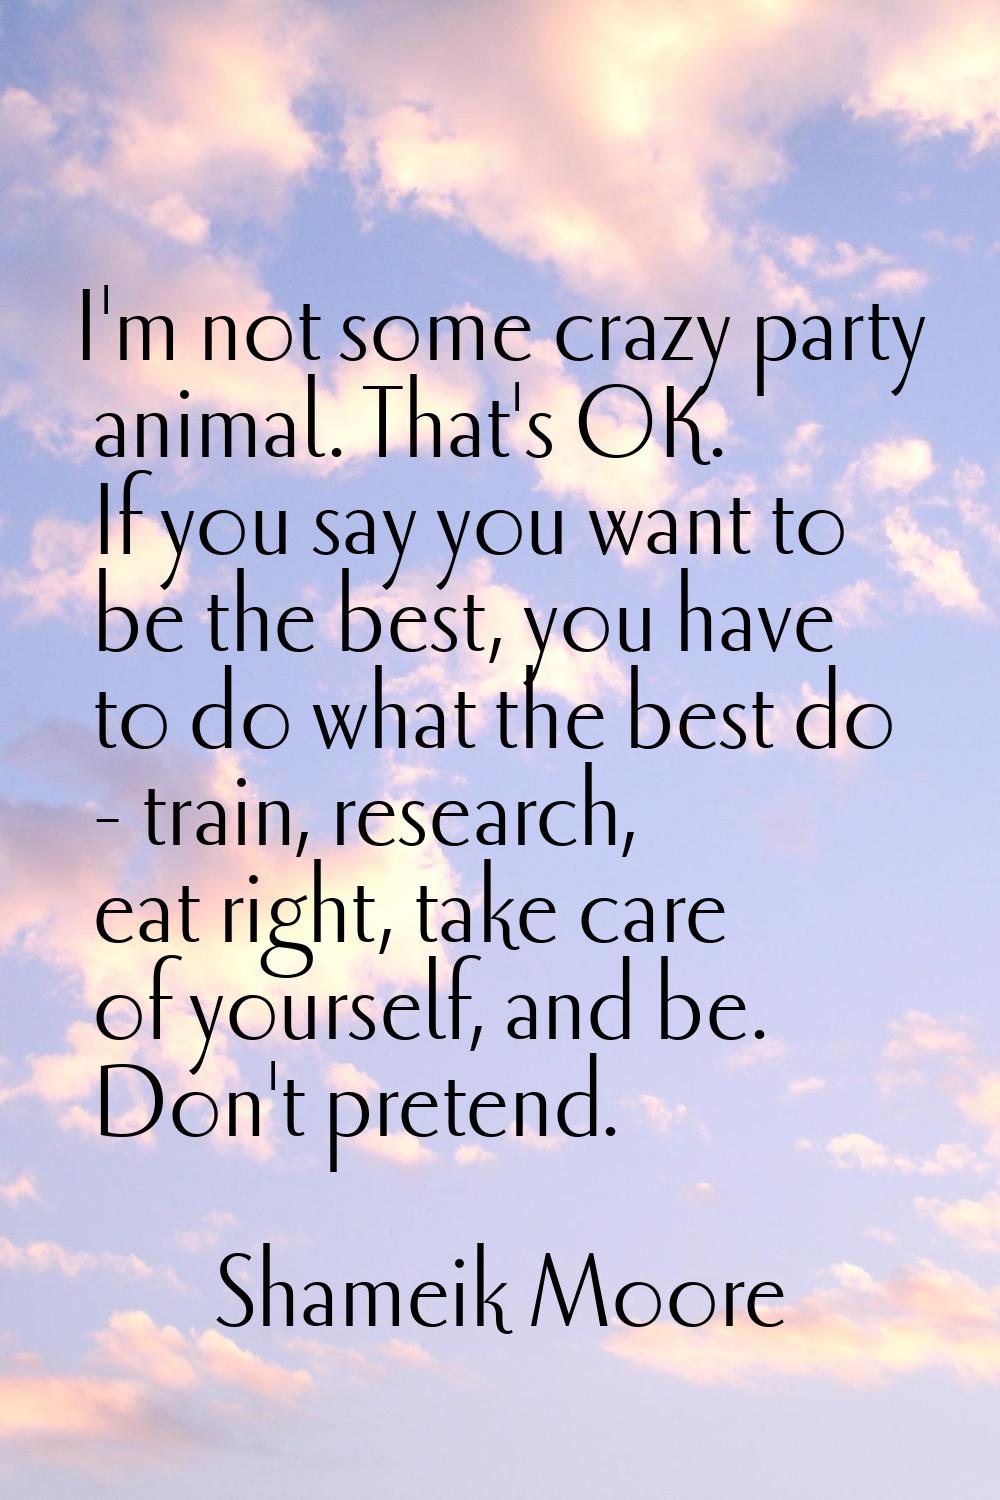 I'm not some crazy party animal. That's OK. If you say you want to be the best, you have to do what